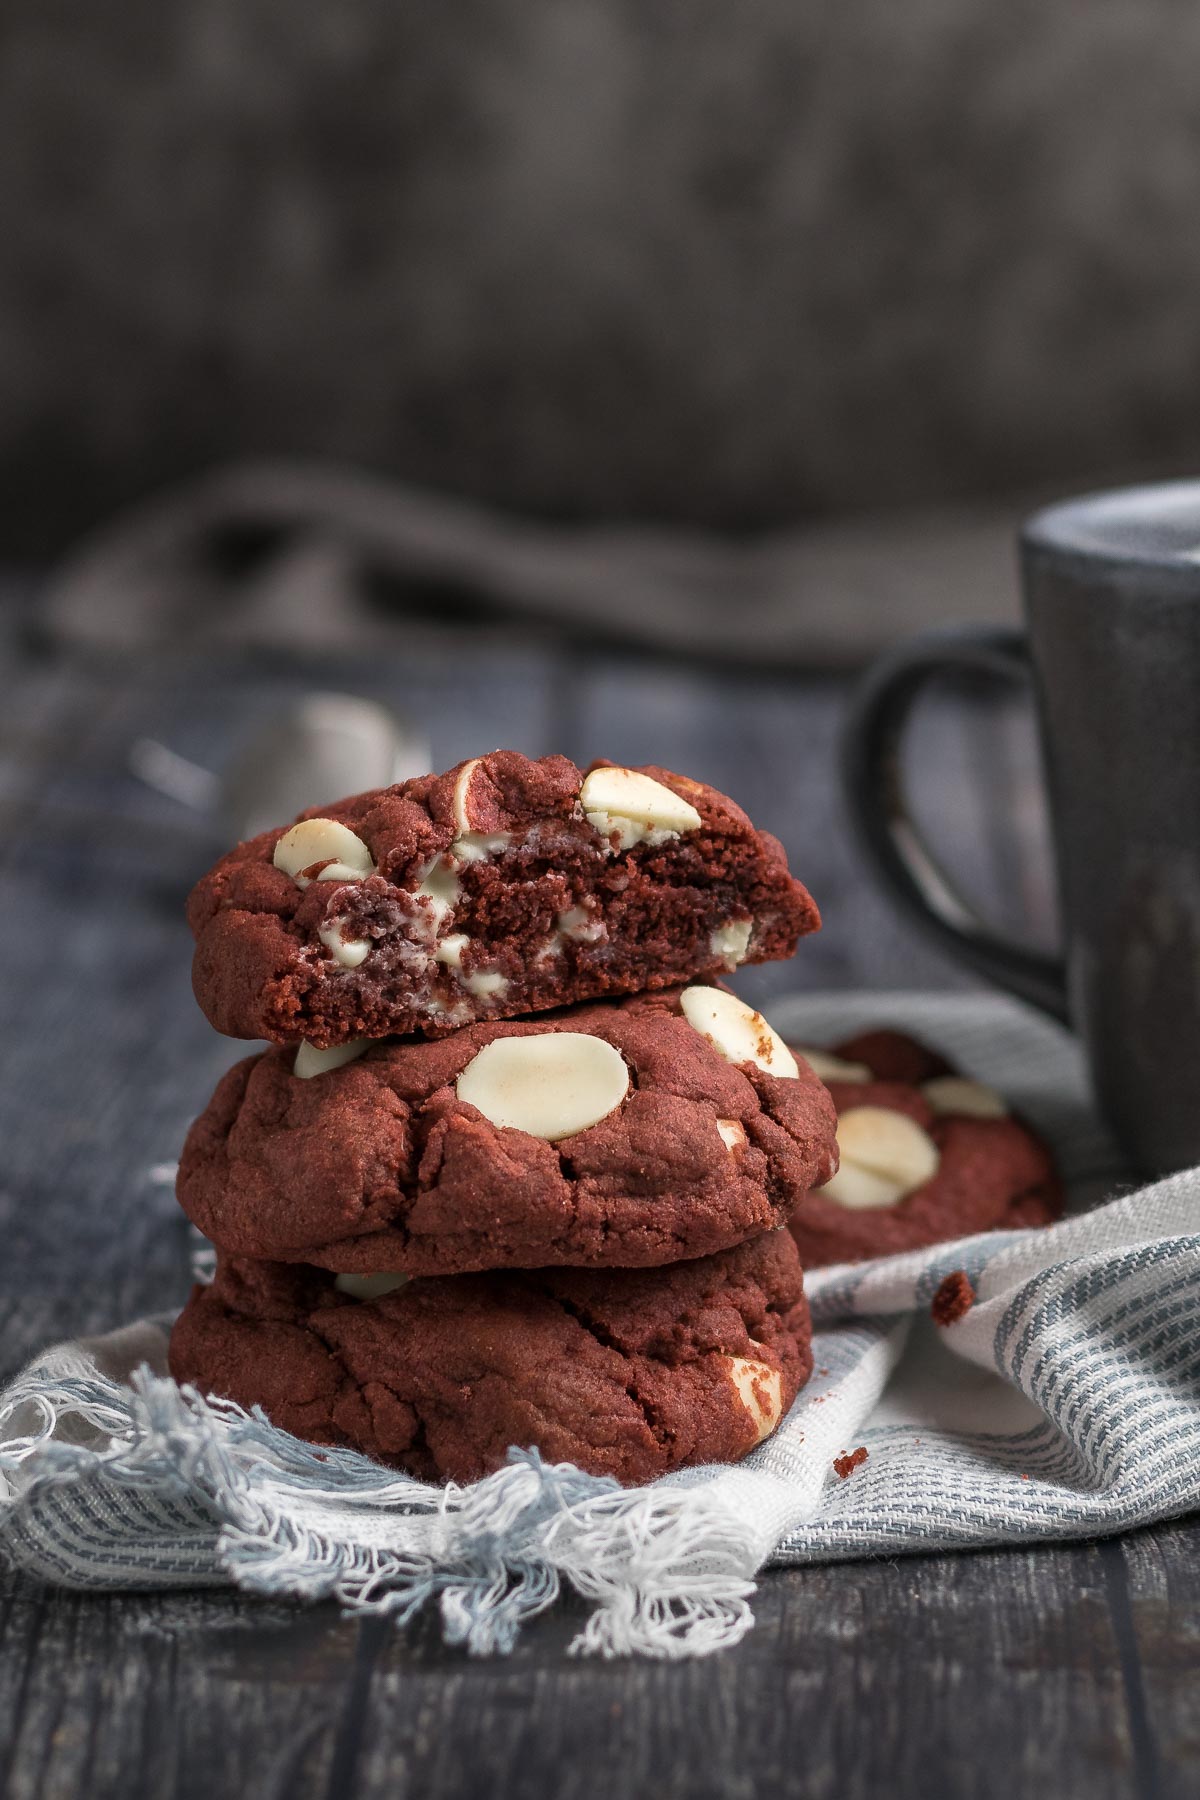 Three white chocolate red velvet cookies stacked on each other with a cup of coffee